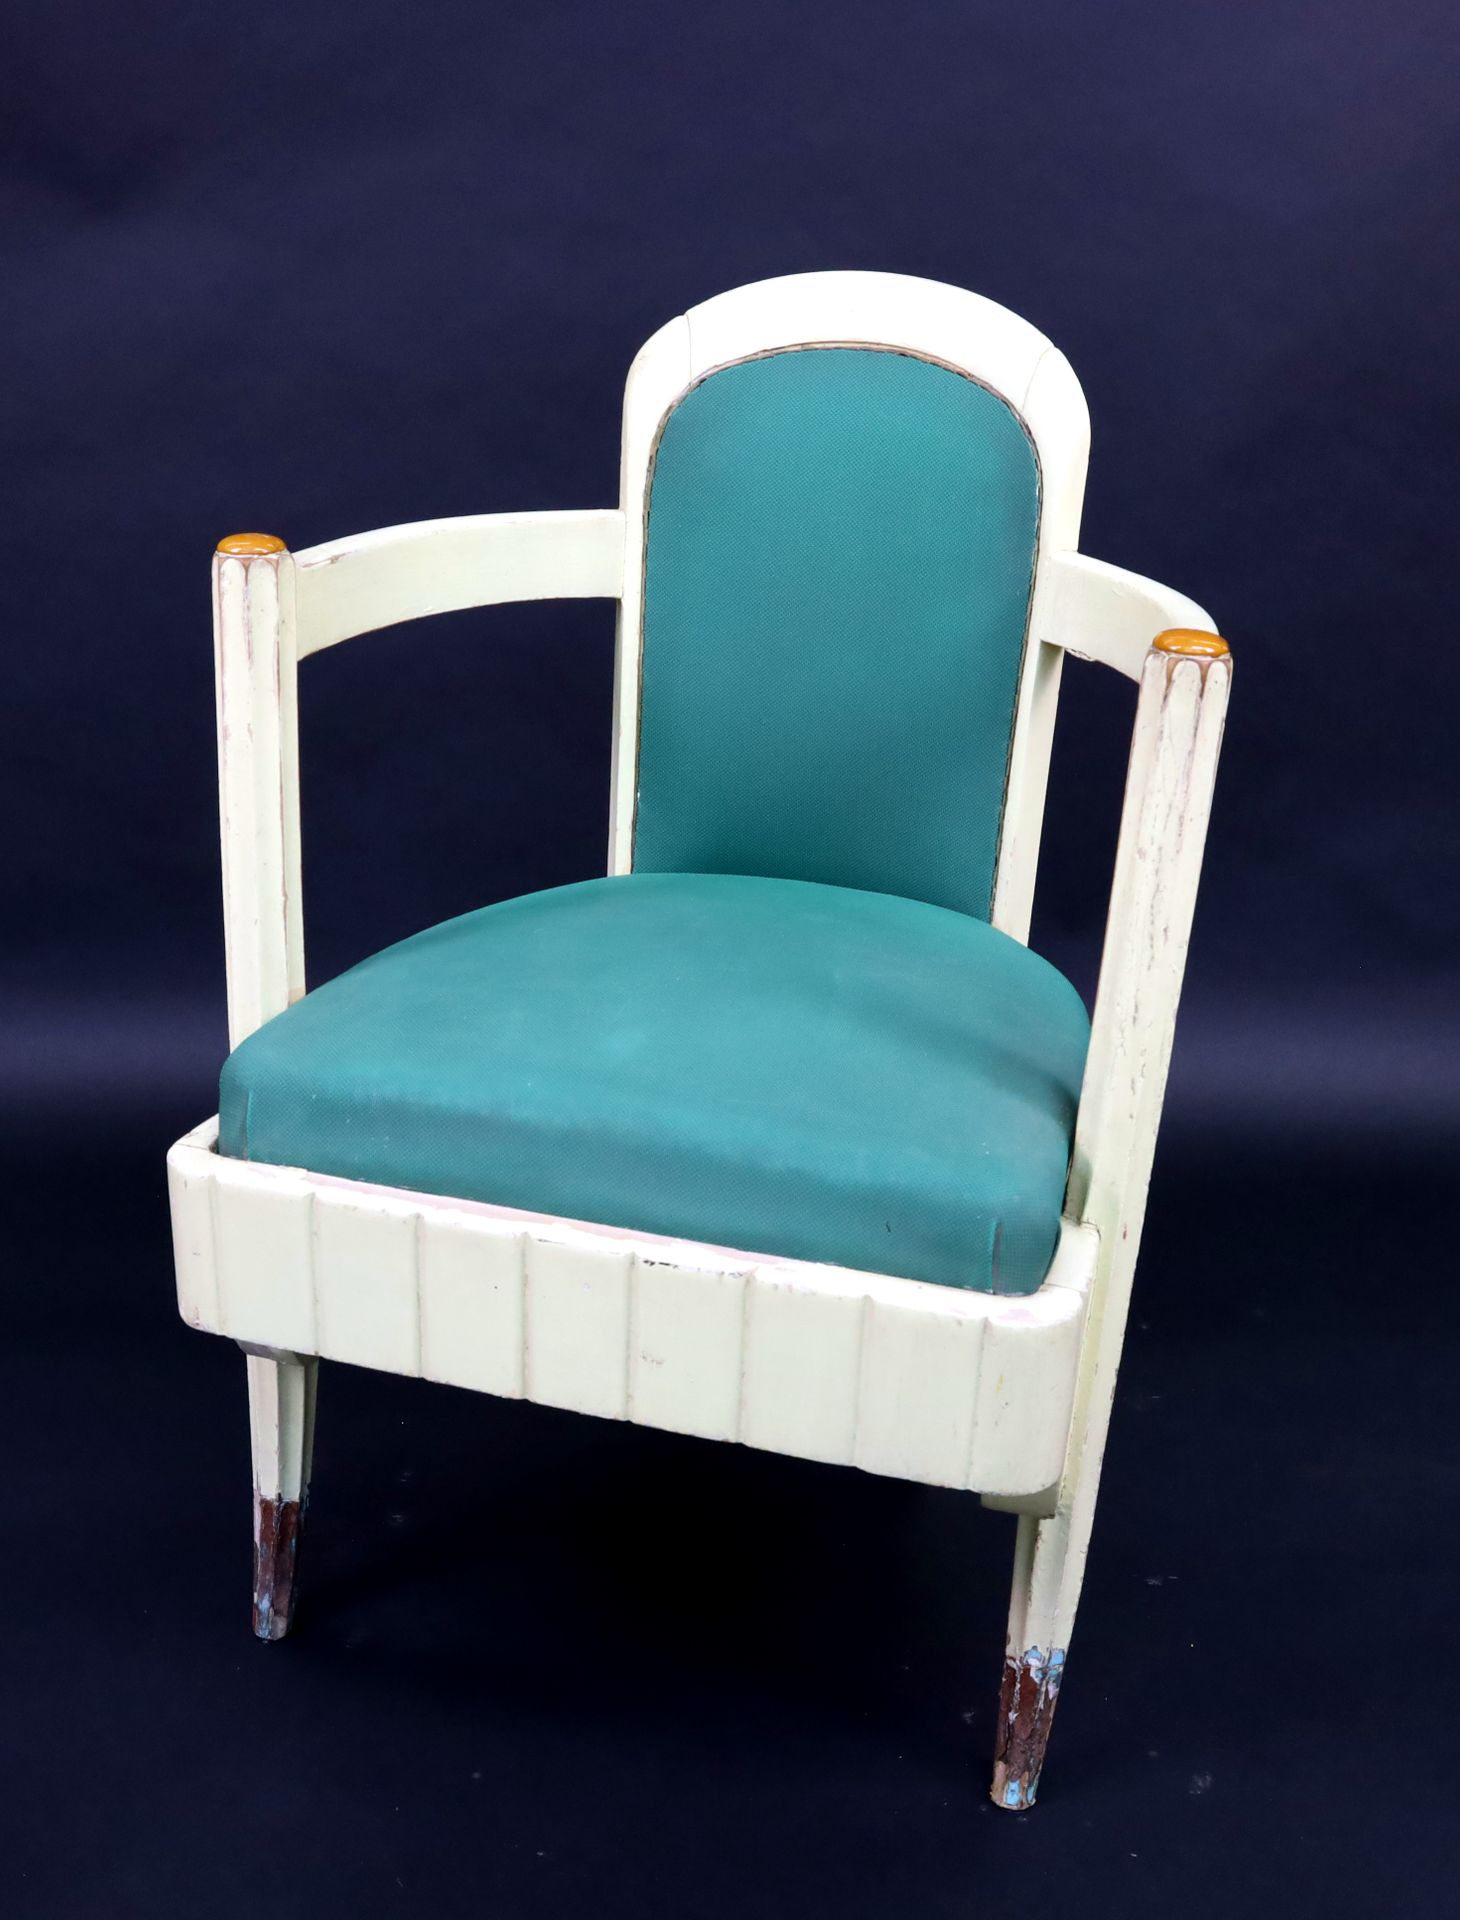 Null CGT Ile de France 1949 - White lacquered wood armchair from the Dining Room&hellip;